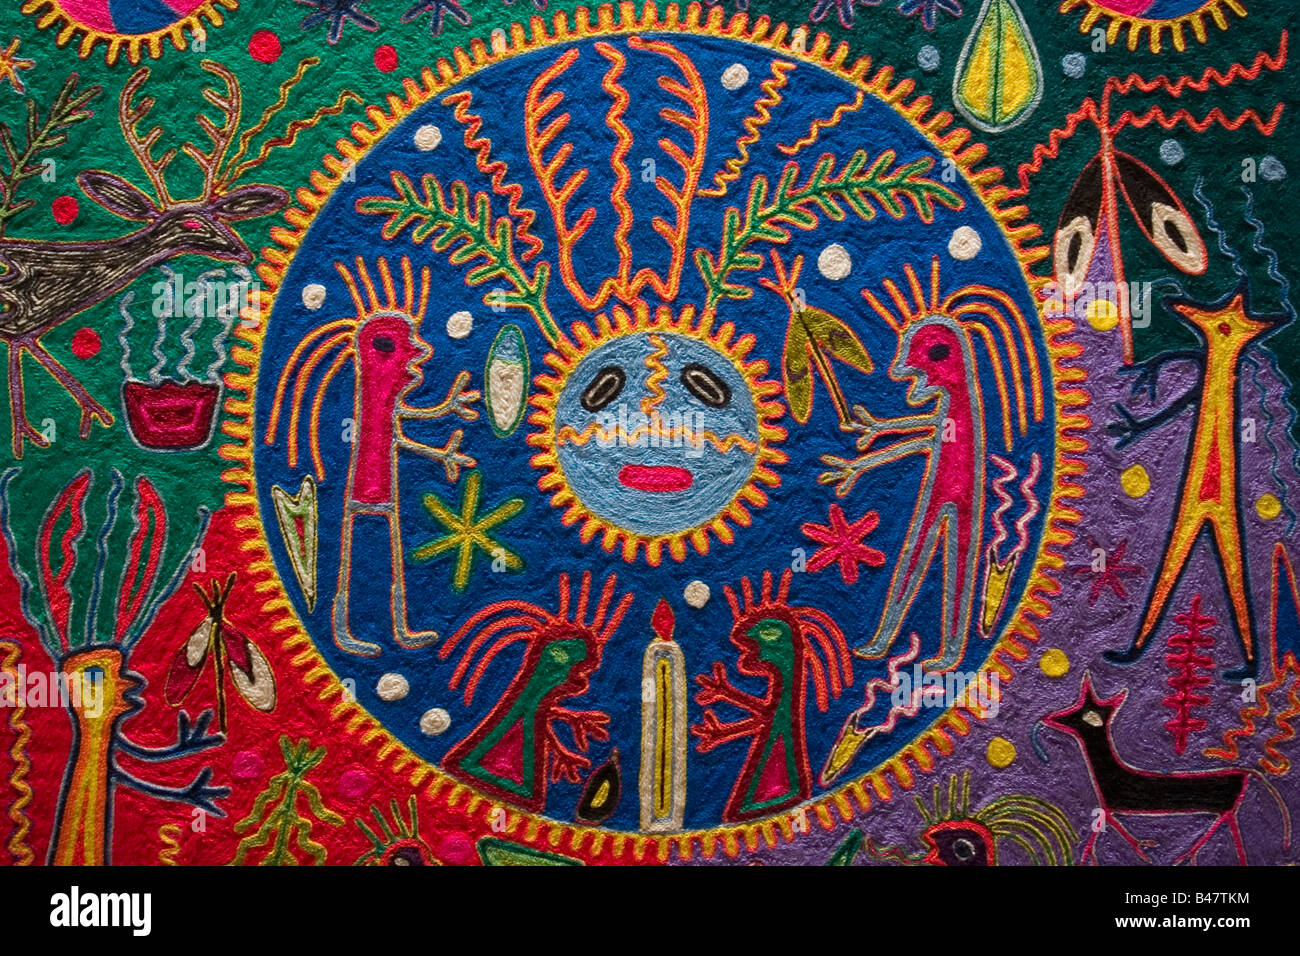 Neirika yarn painting made by the Huichol indians of central Mexico at the National Museum of Anthropology in Mexico City. Stock Photo